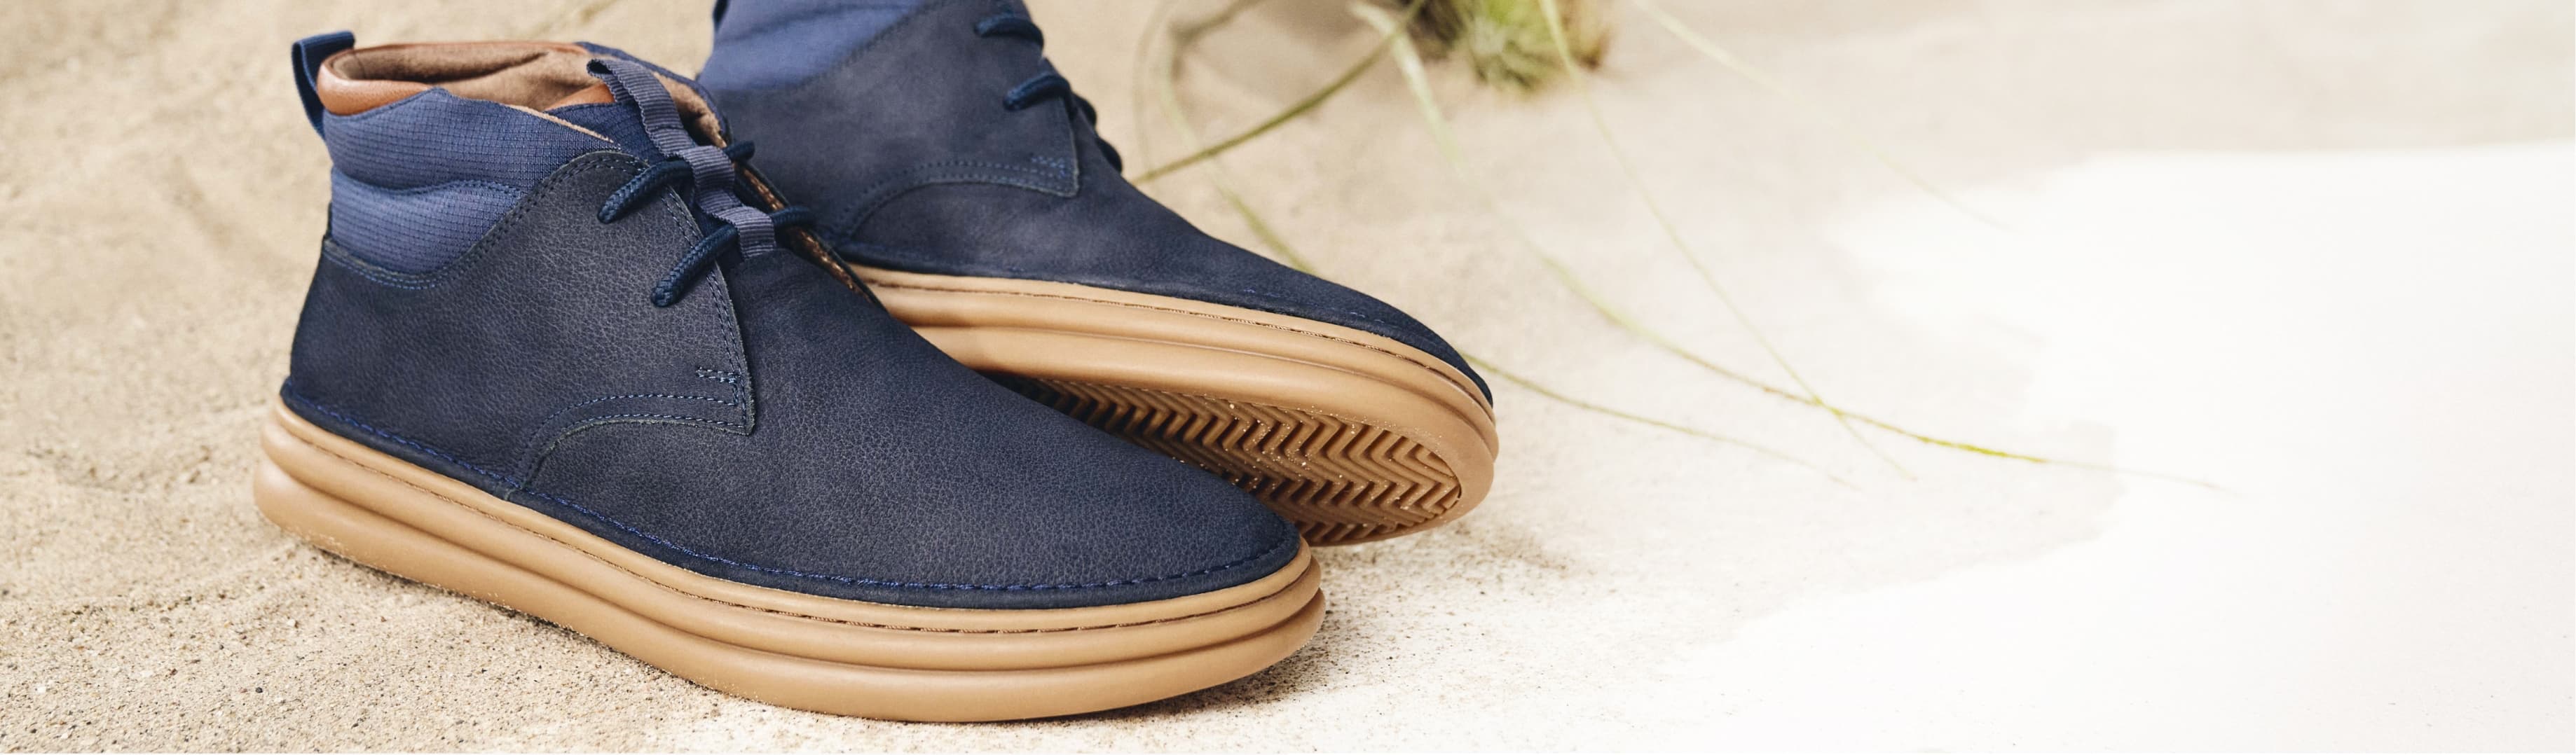 Click to shop the Delson. Image features the Delson in navy.